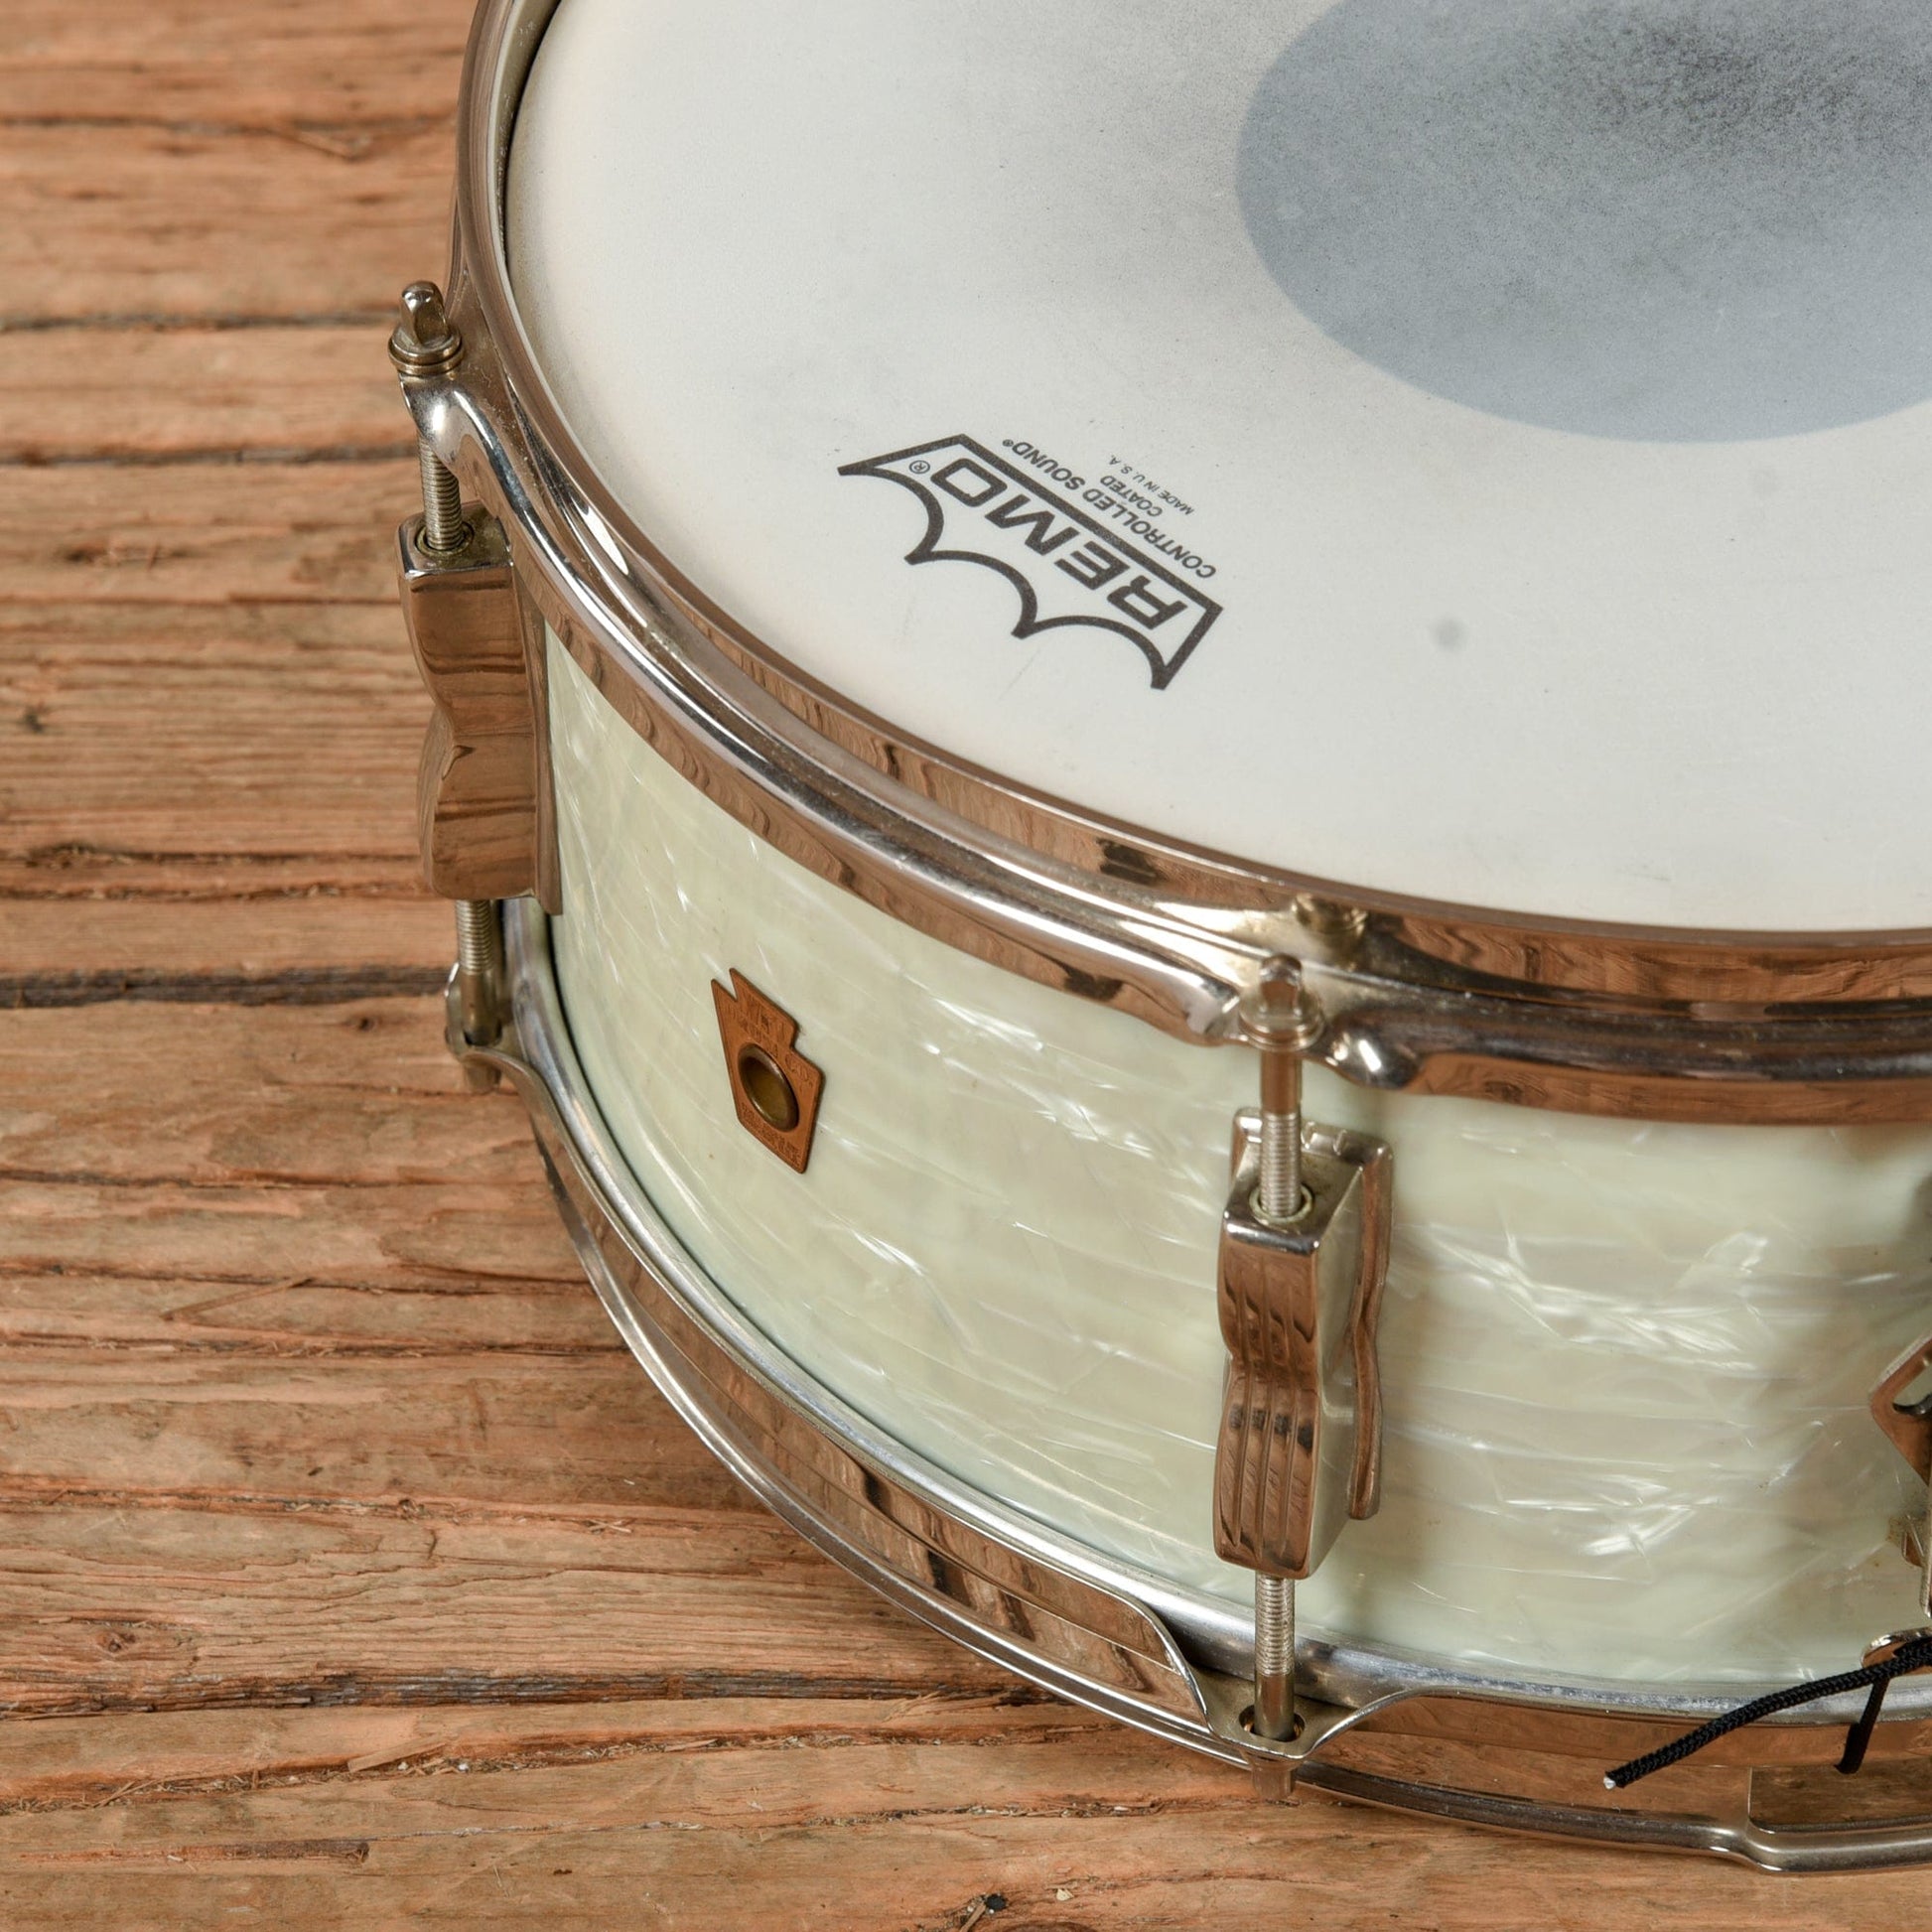 WFL 6.5x13 1950's Snare Drum White Marine Pearl Drums and Percussion / Acoustic Drums / Snare